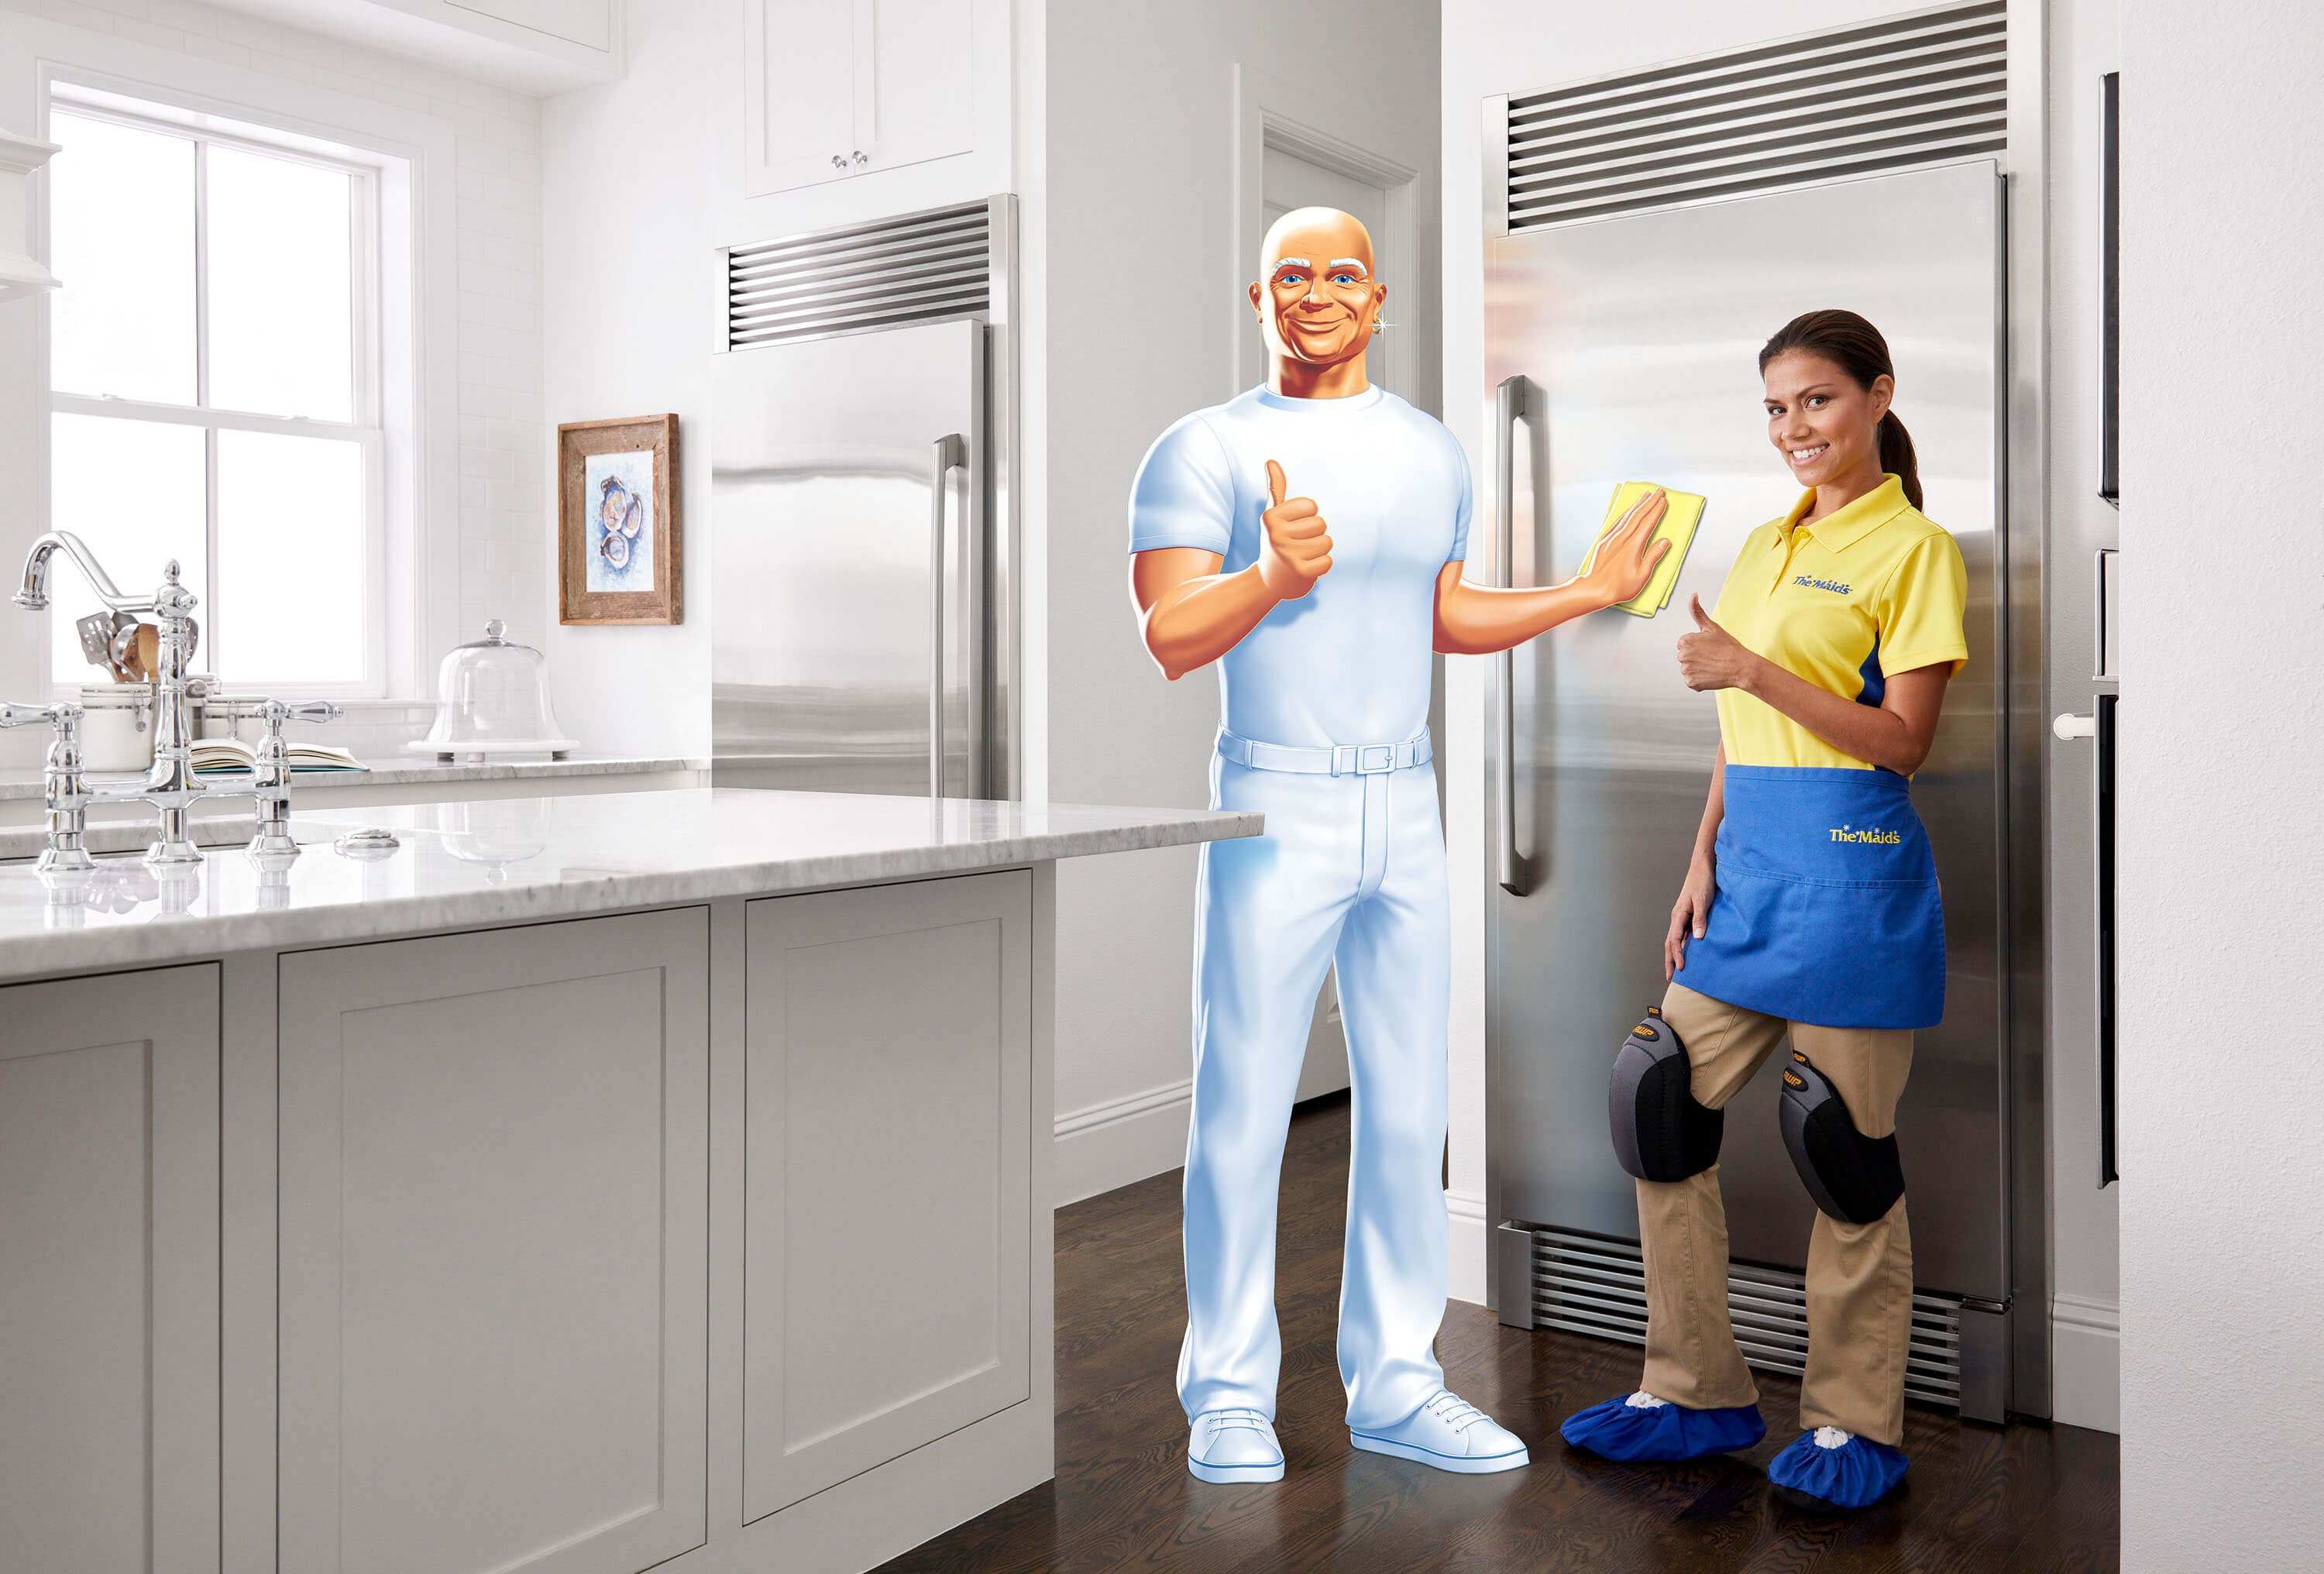 The Maids Mr Clean Refrigerator